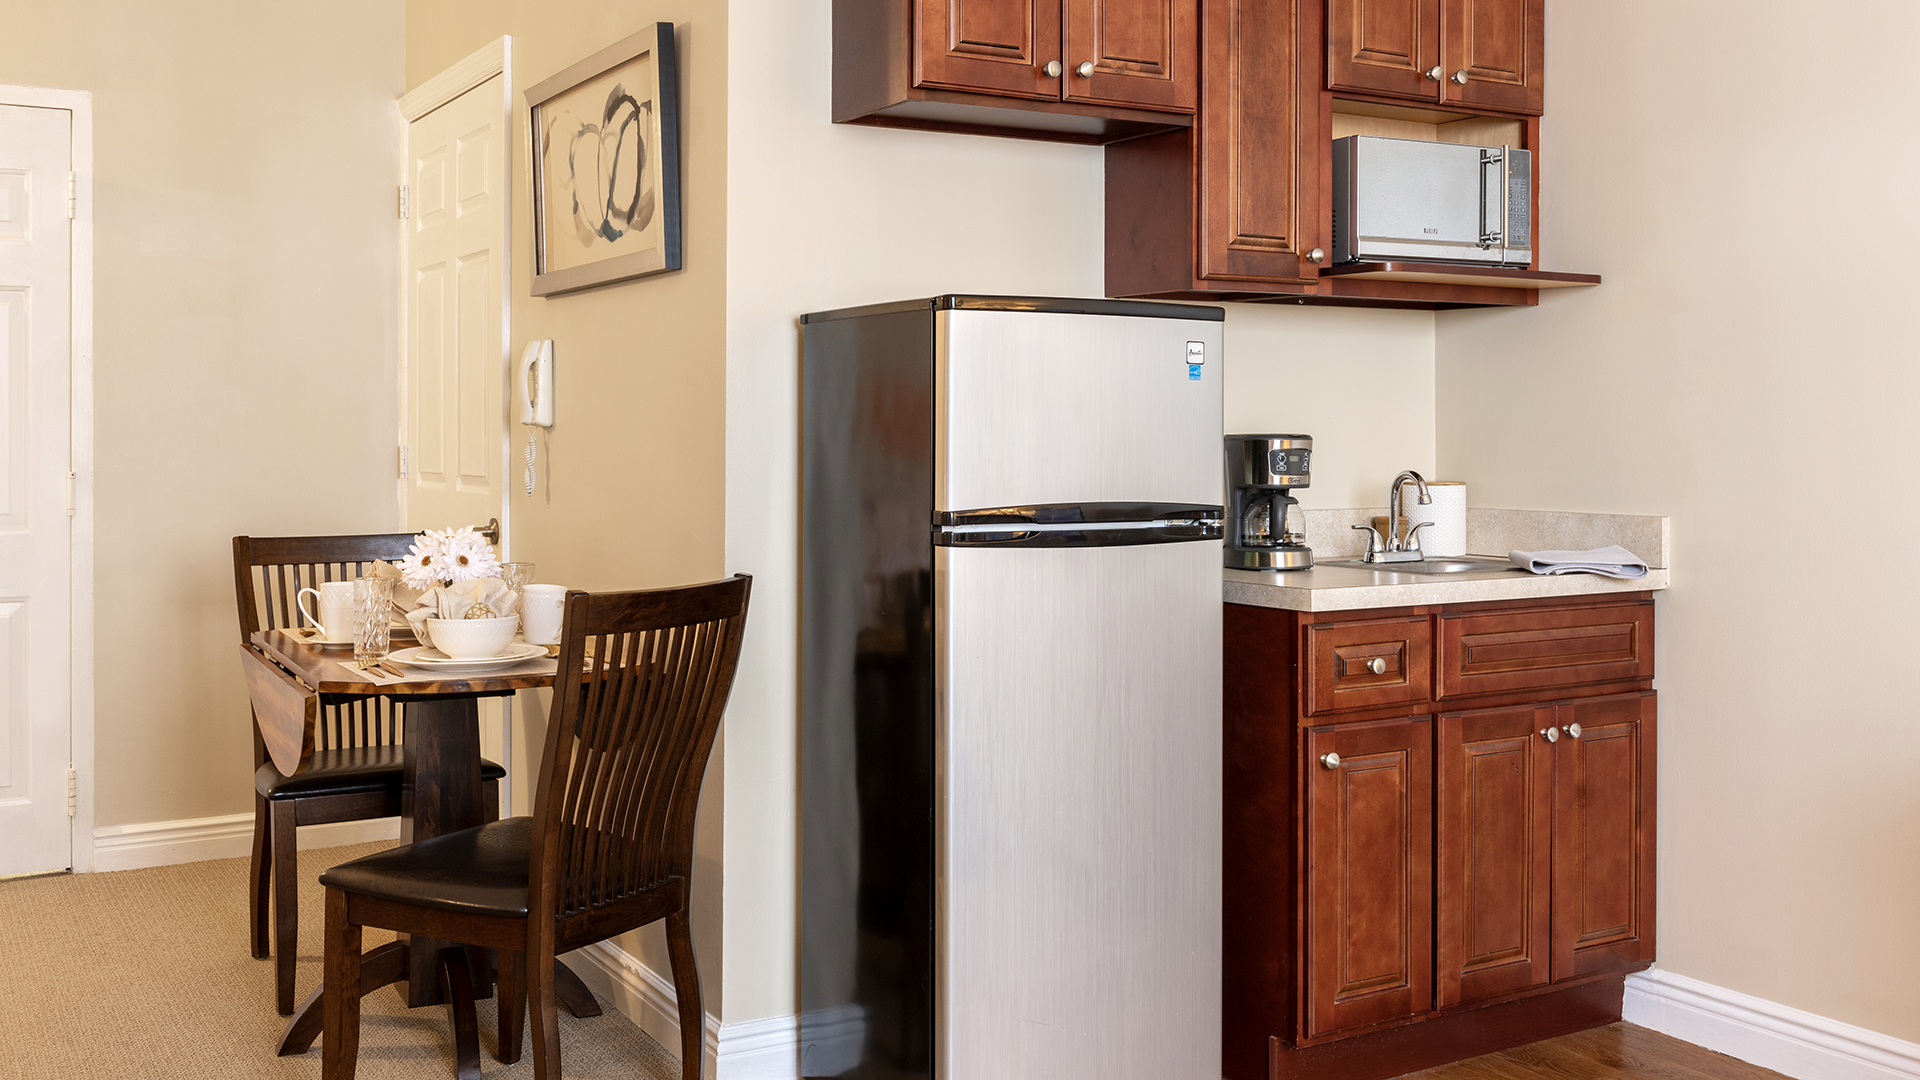 Atria Cranford apartment kitchenette with small refrigerator, microwave, cabinets, and small table and chairs set.